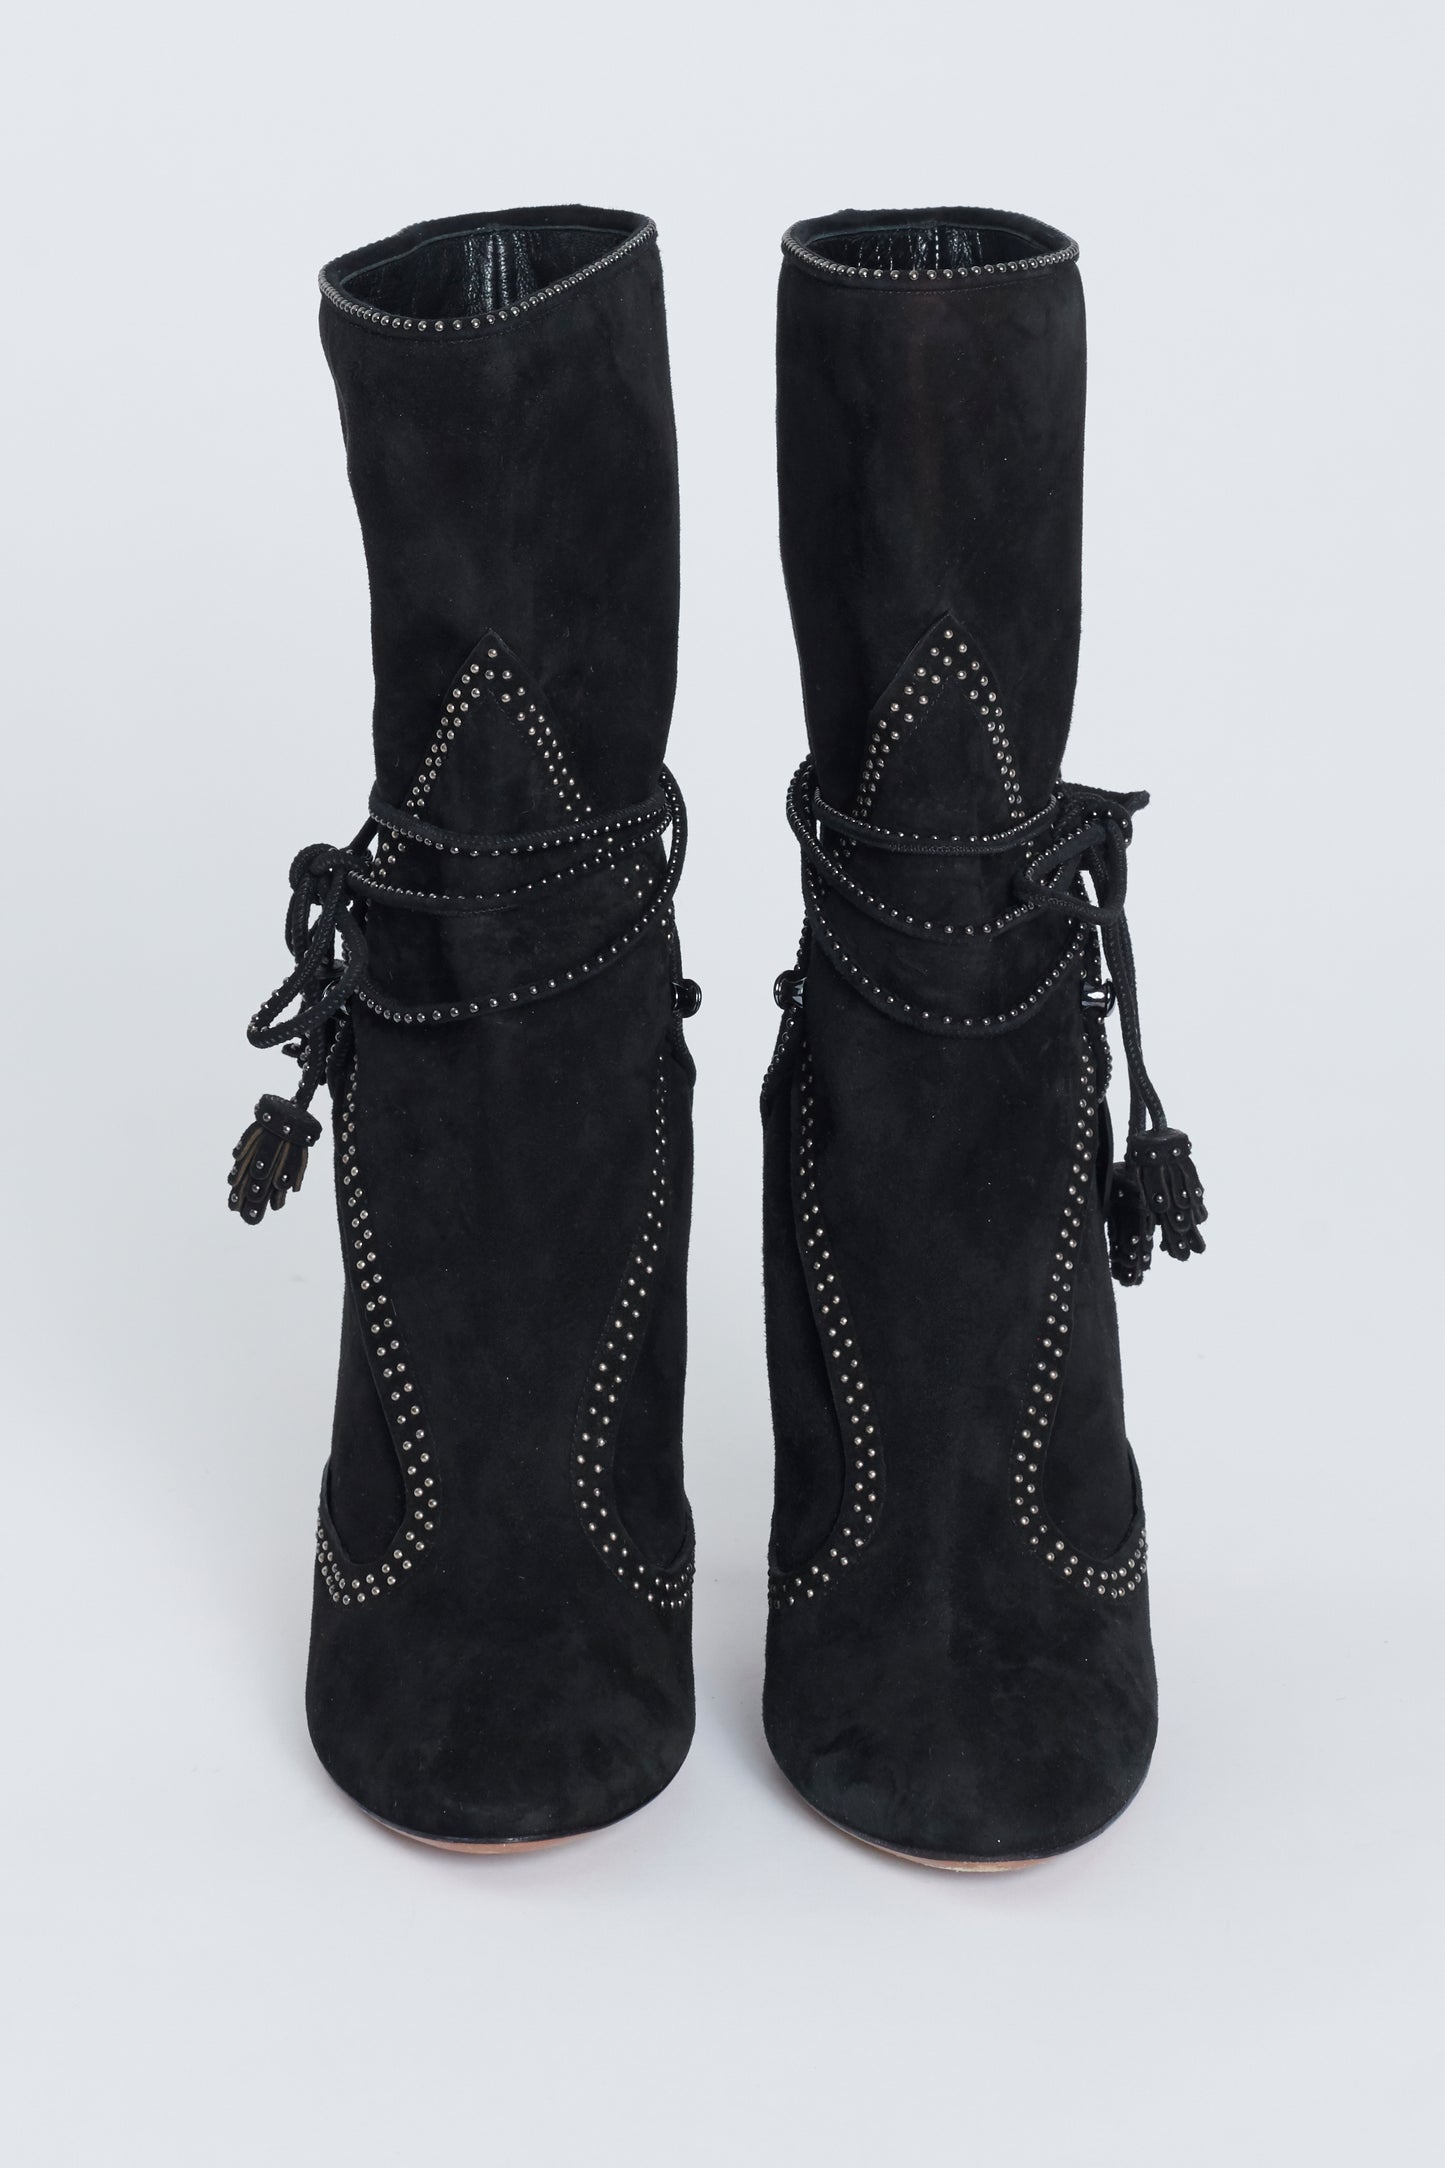 Black Suede Gunmetal Studded Stiletto Heeled Preowned Boots